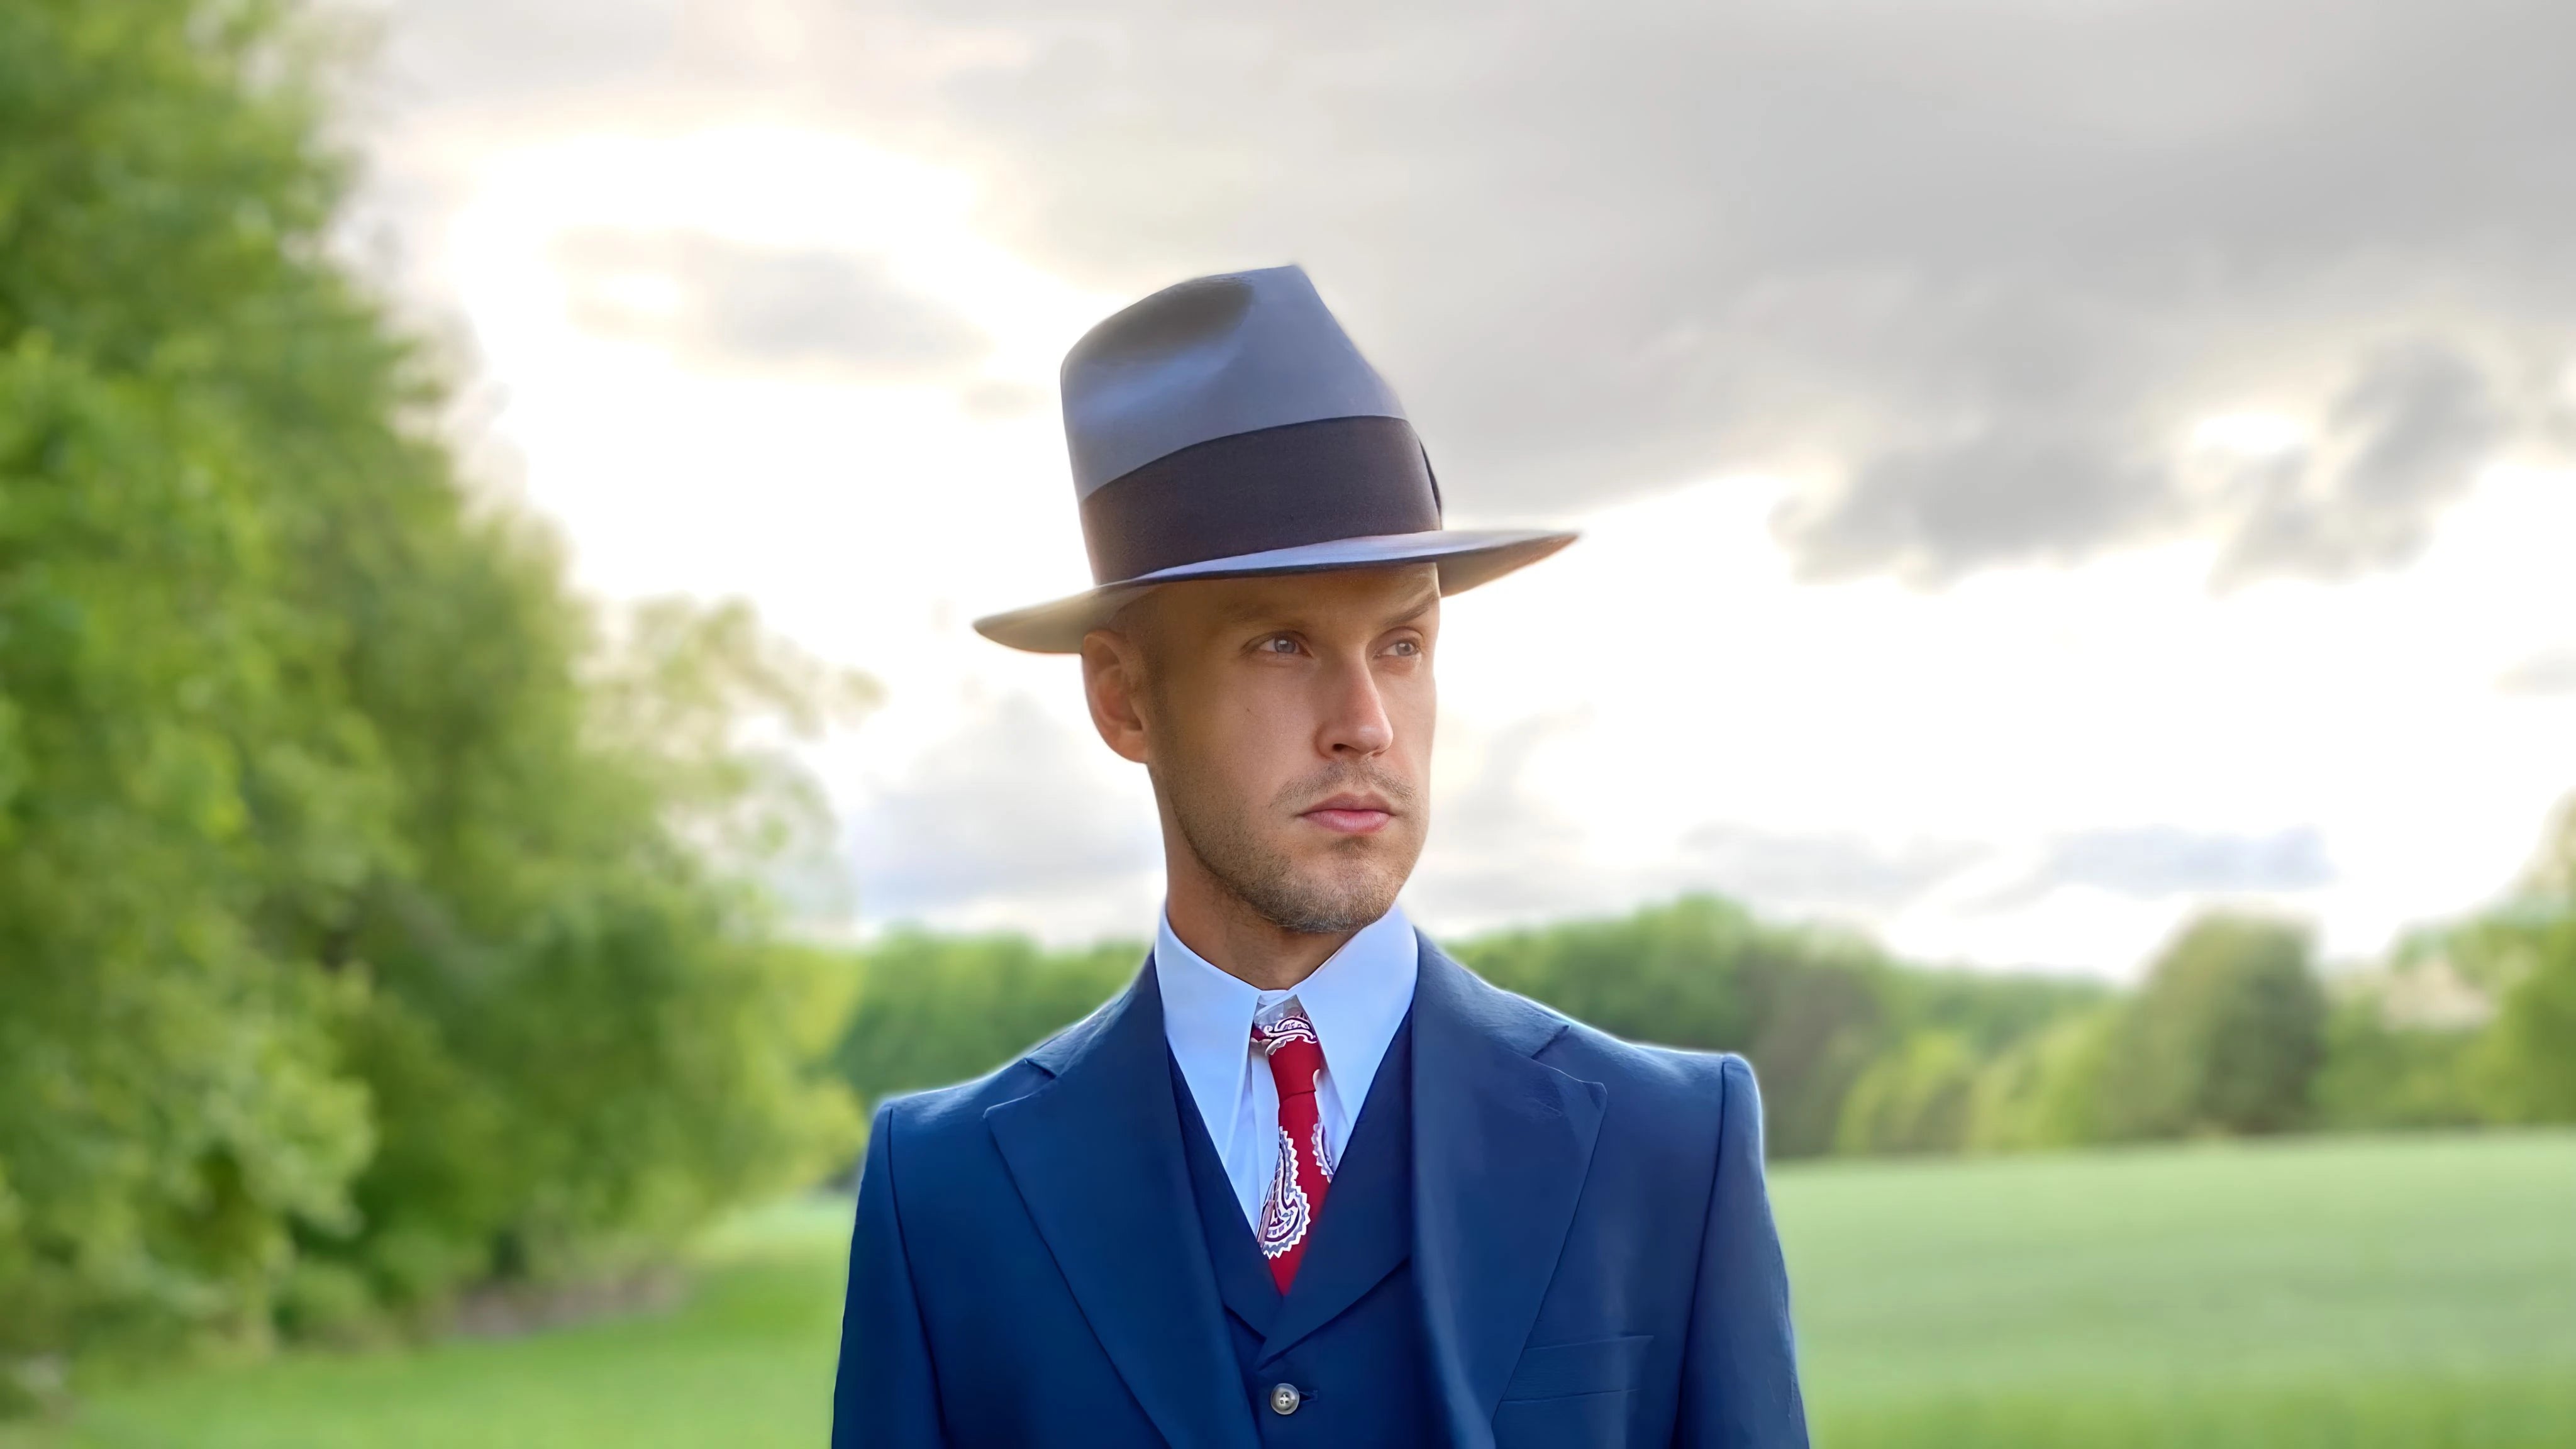 Well-dressed gentleman standing under a cloudy pastel sky, wearing his new custom beaver fedora from Agnoulita Hats.